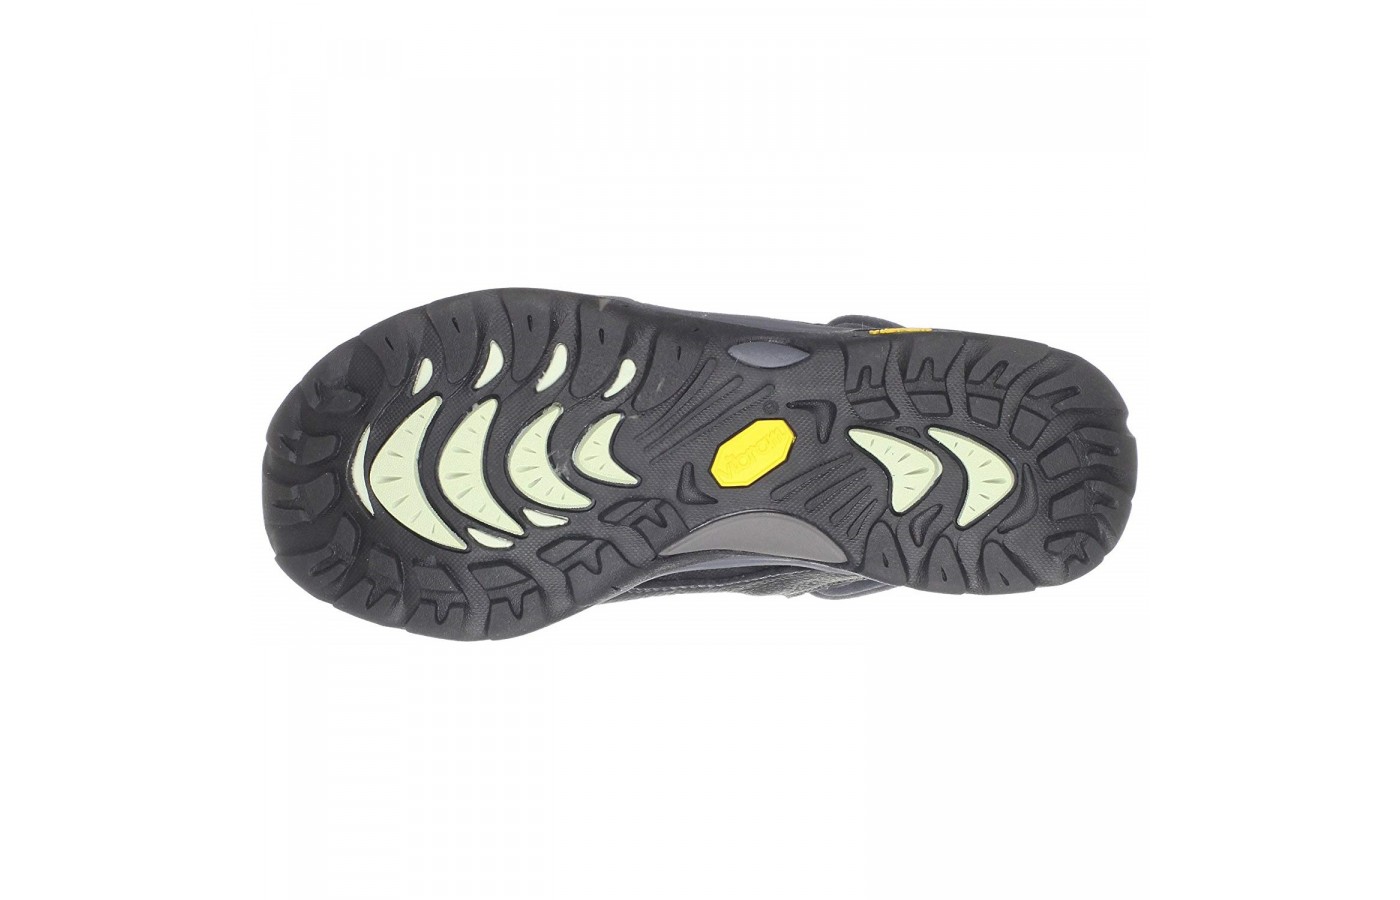 The Ahnu Montara offers Vibram leather outsoles for grip and protection.